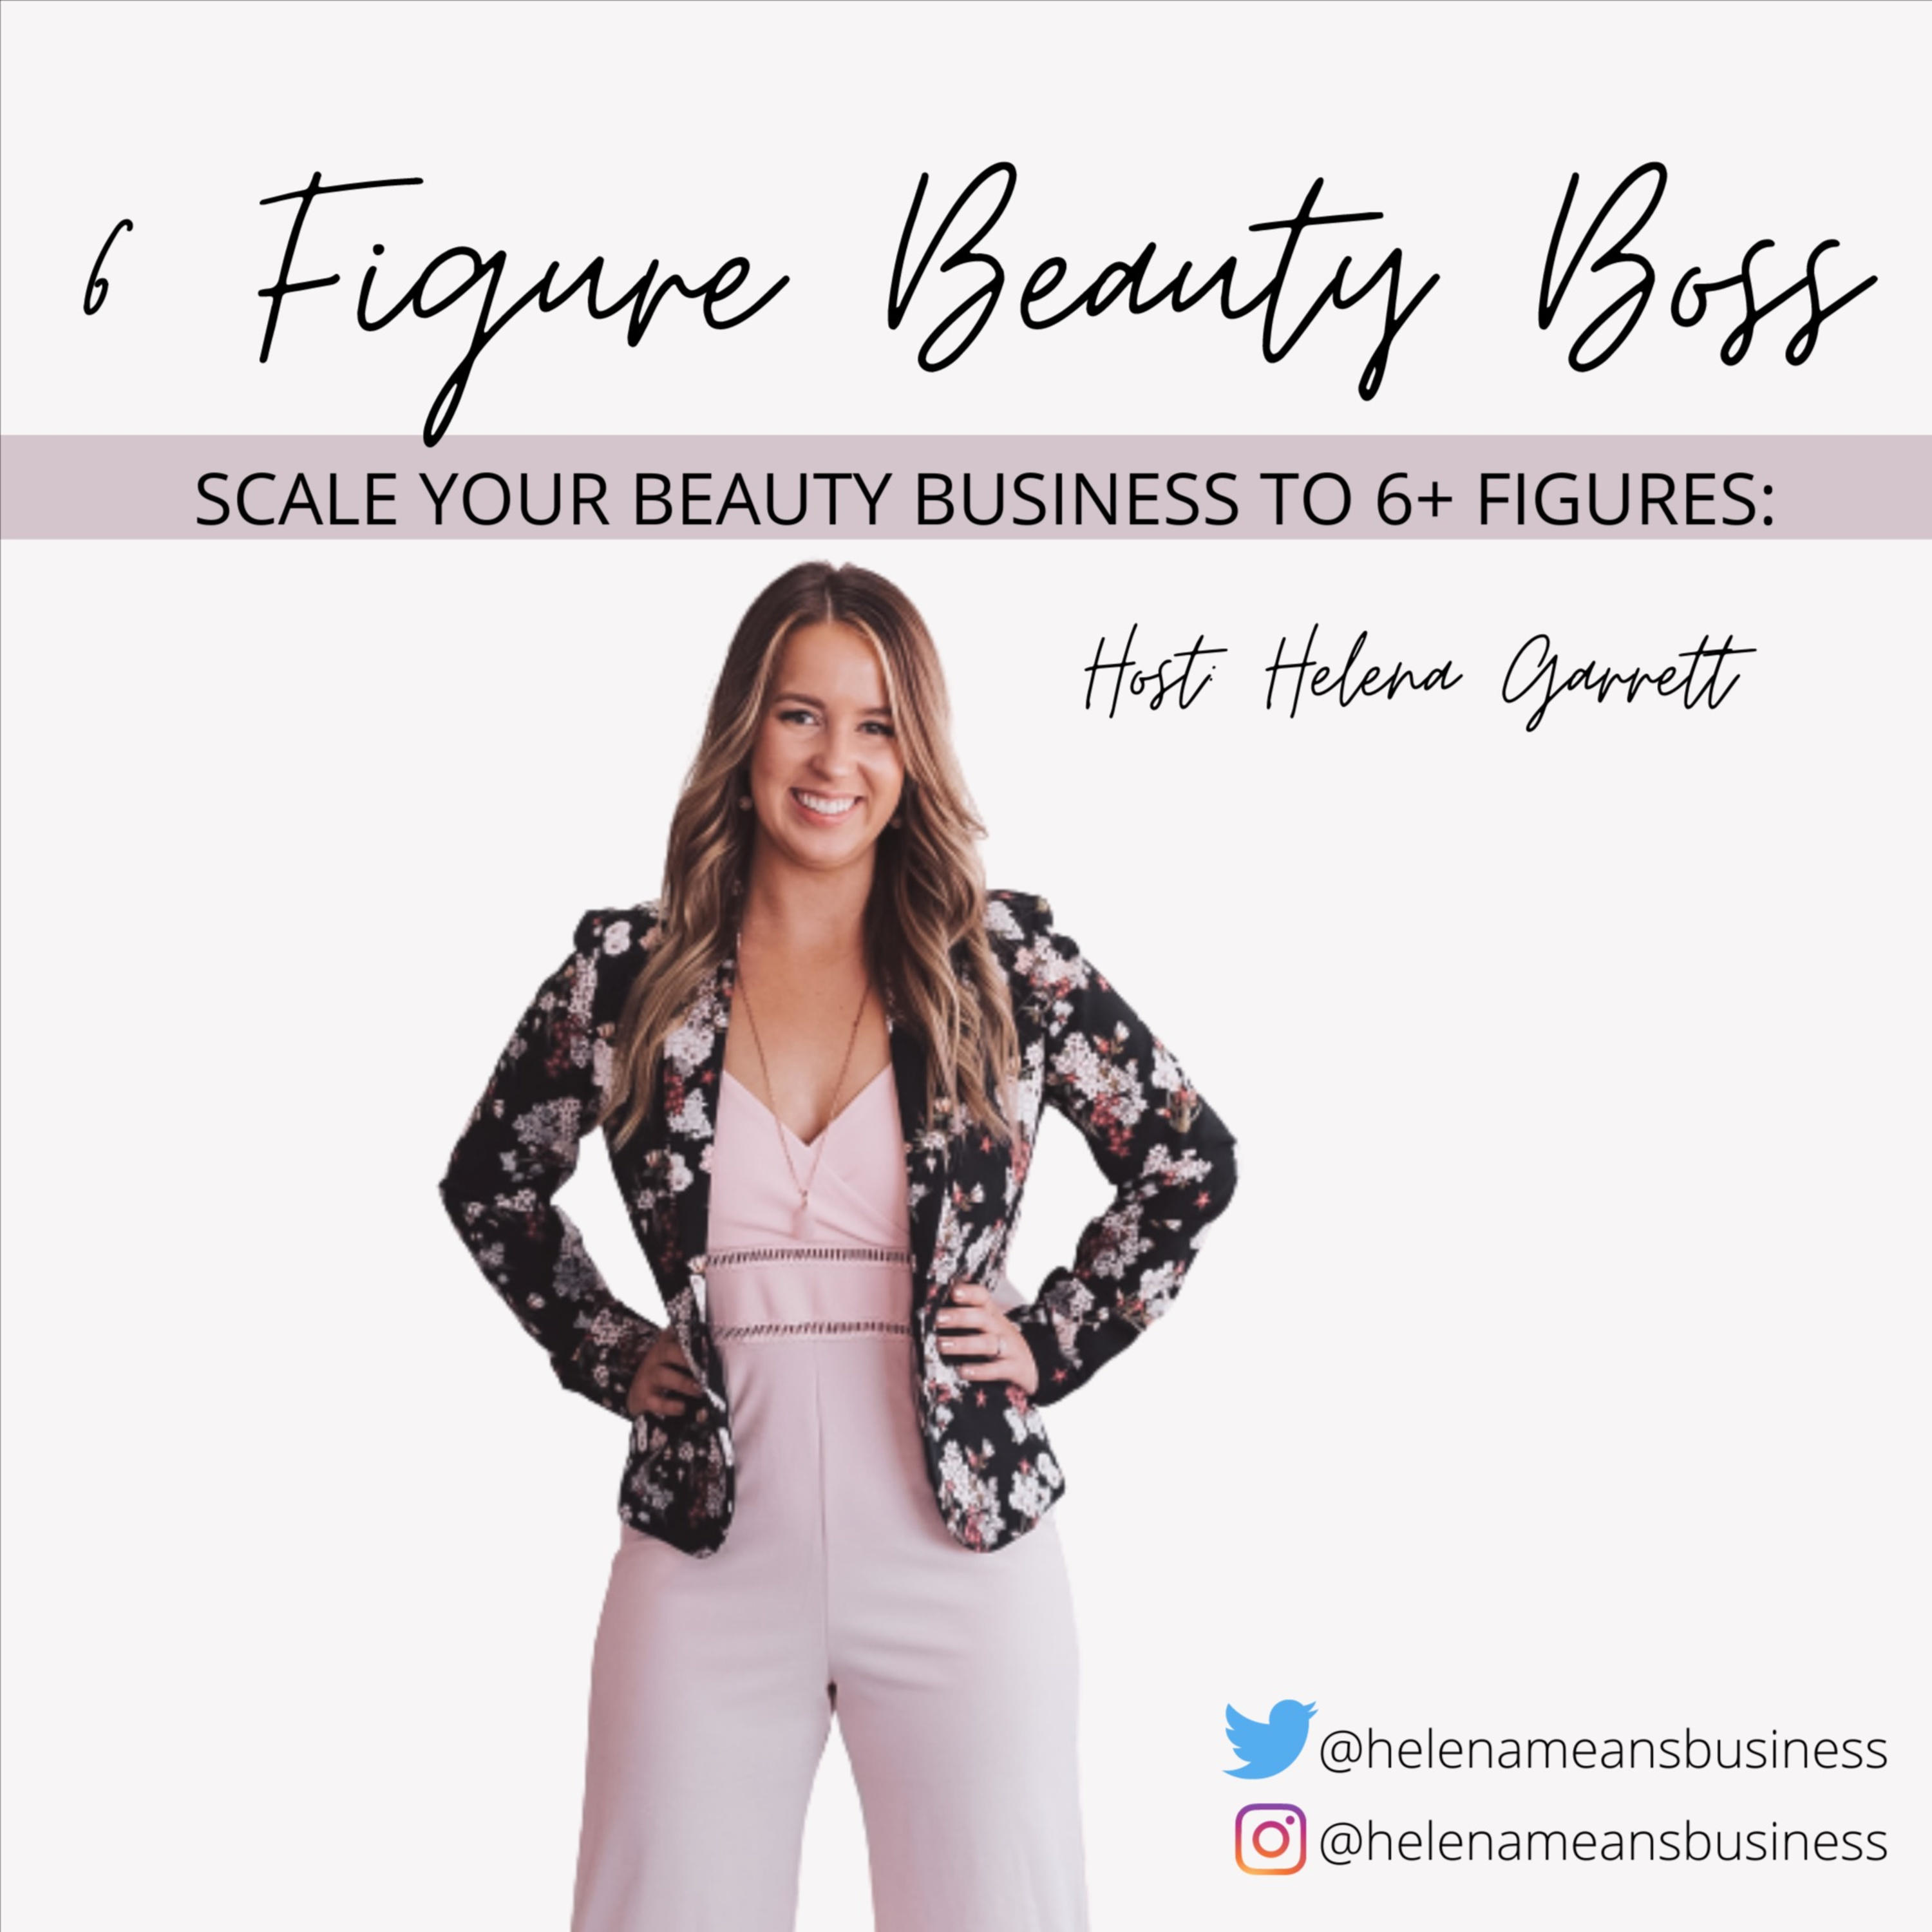 How to DEMOLISH burnout in your beauty business!